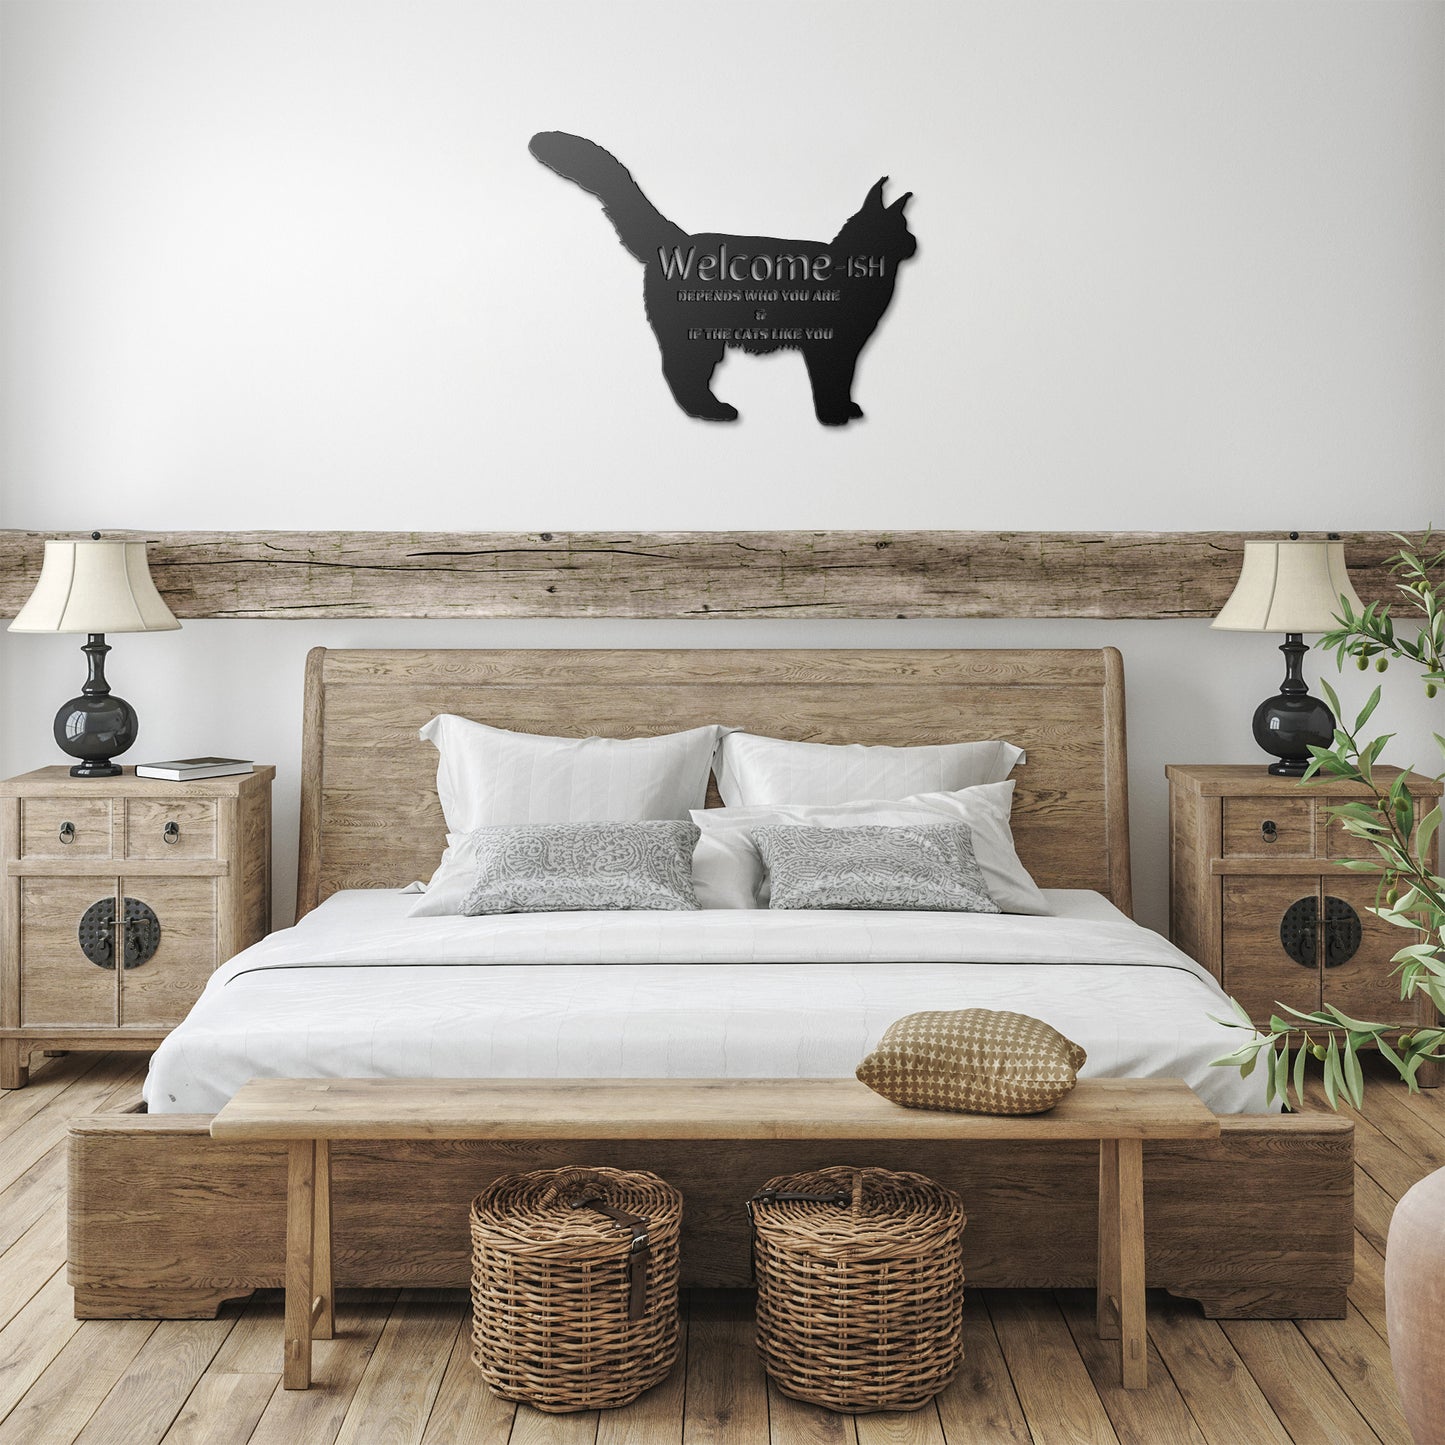 Greet with Grandeur: The Majestic Maine Coon Laser Cut Metal Welcome Sign for Cat Enthusiasts